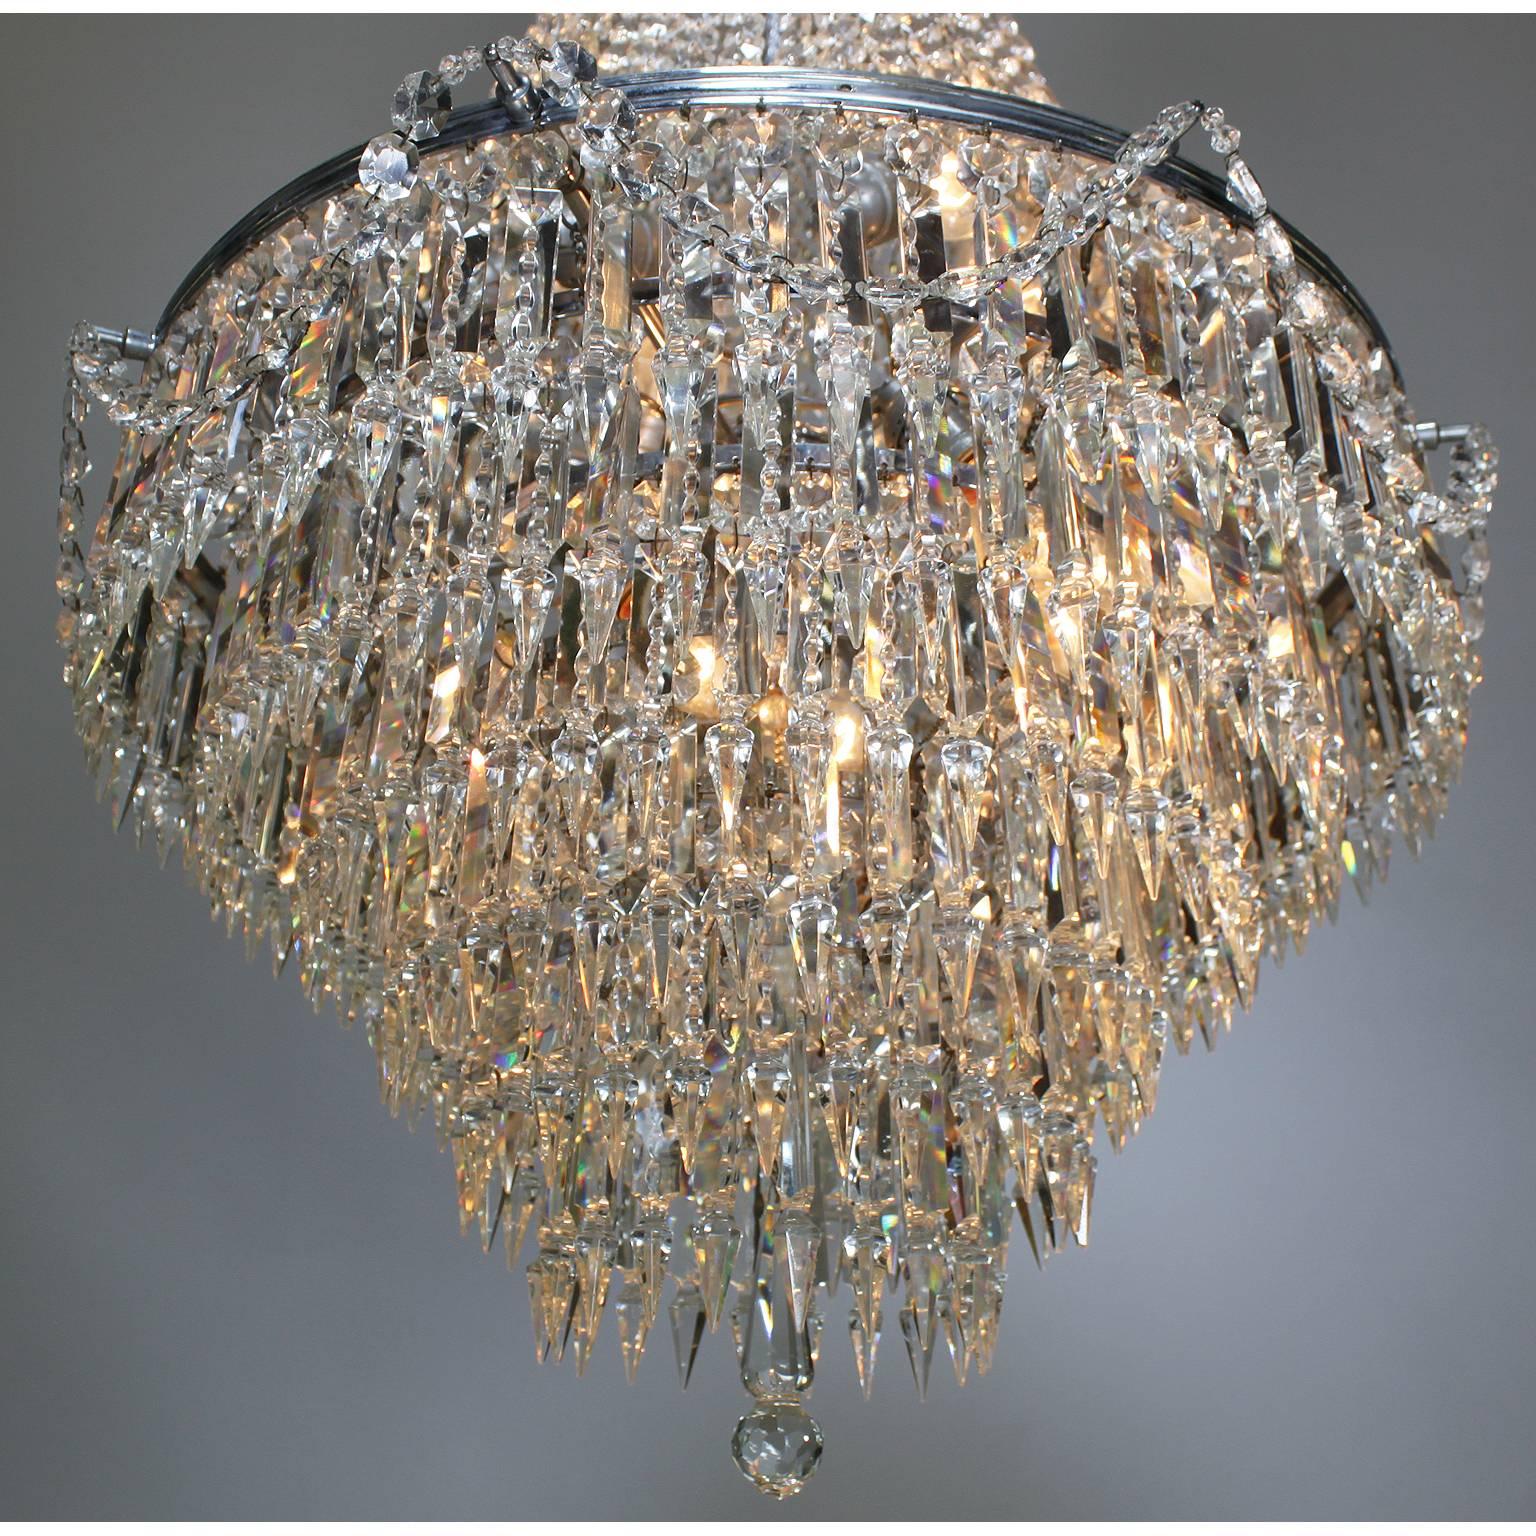 French Belle Epoque 19th-20th Century Cut-Glass Chandelier, Baccarat Attributed In Good Condition For Sale In Los Angeles, CA